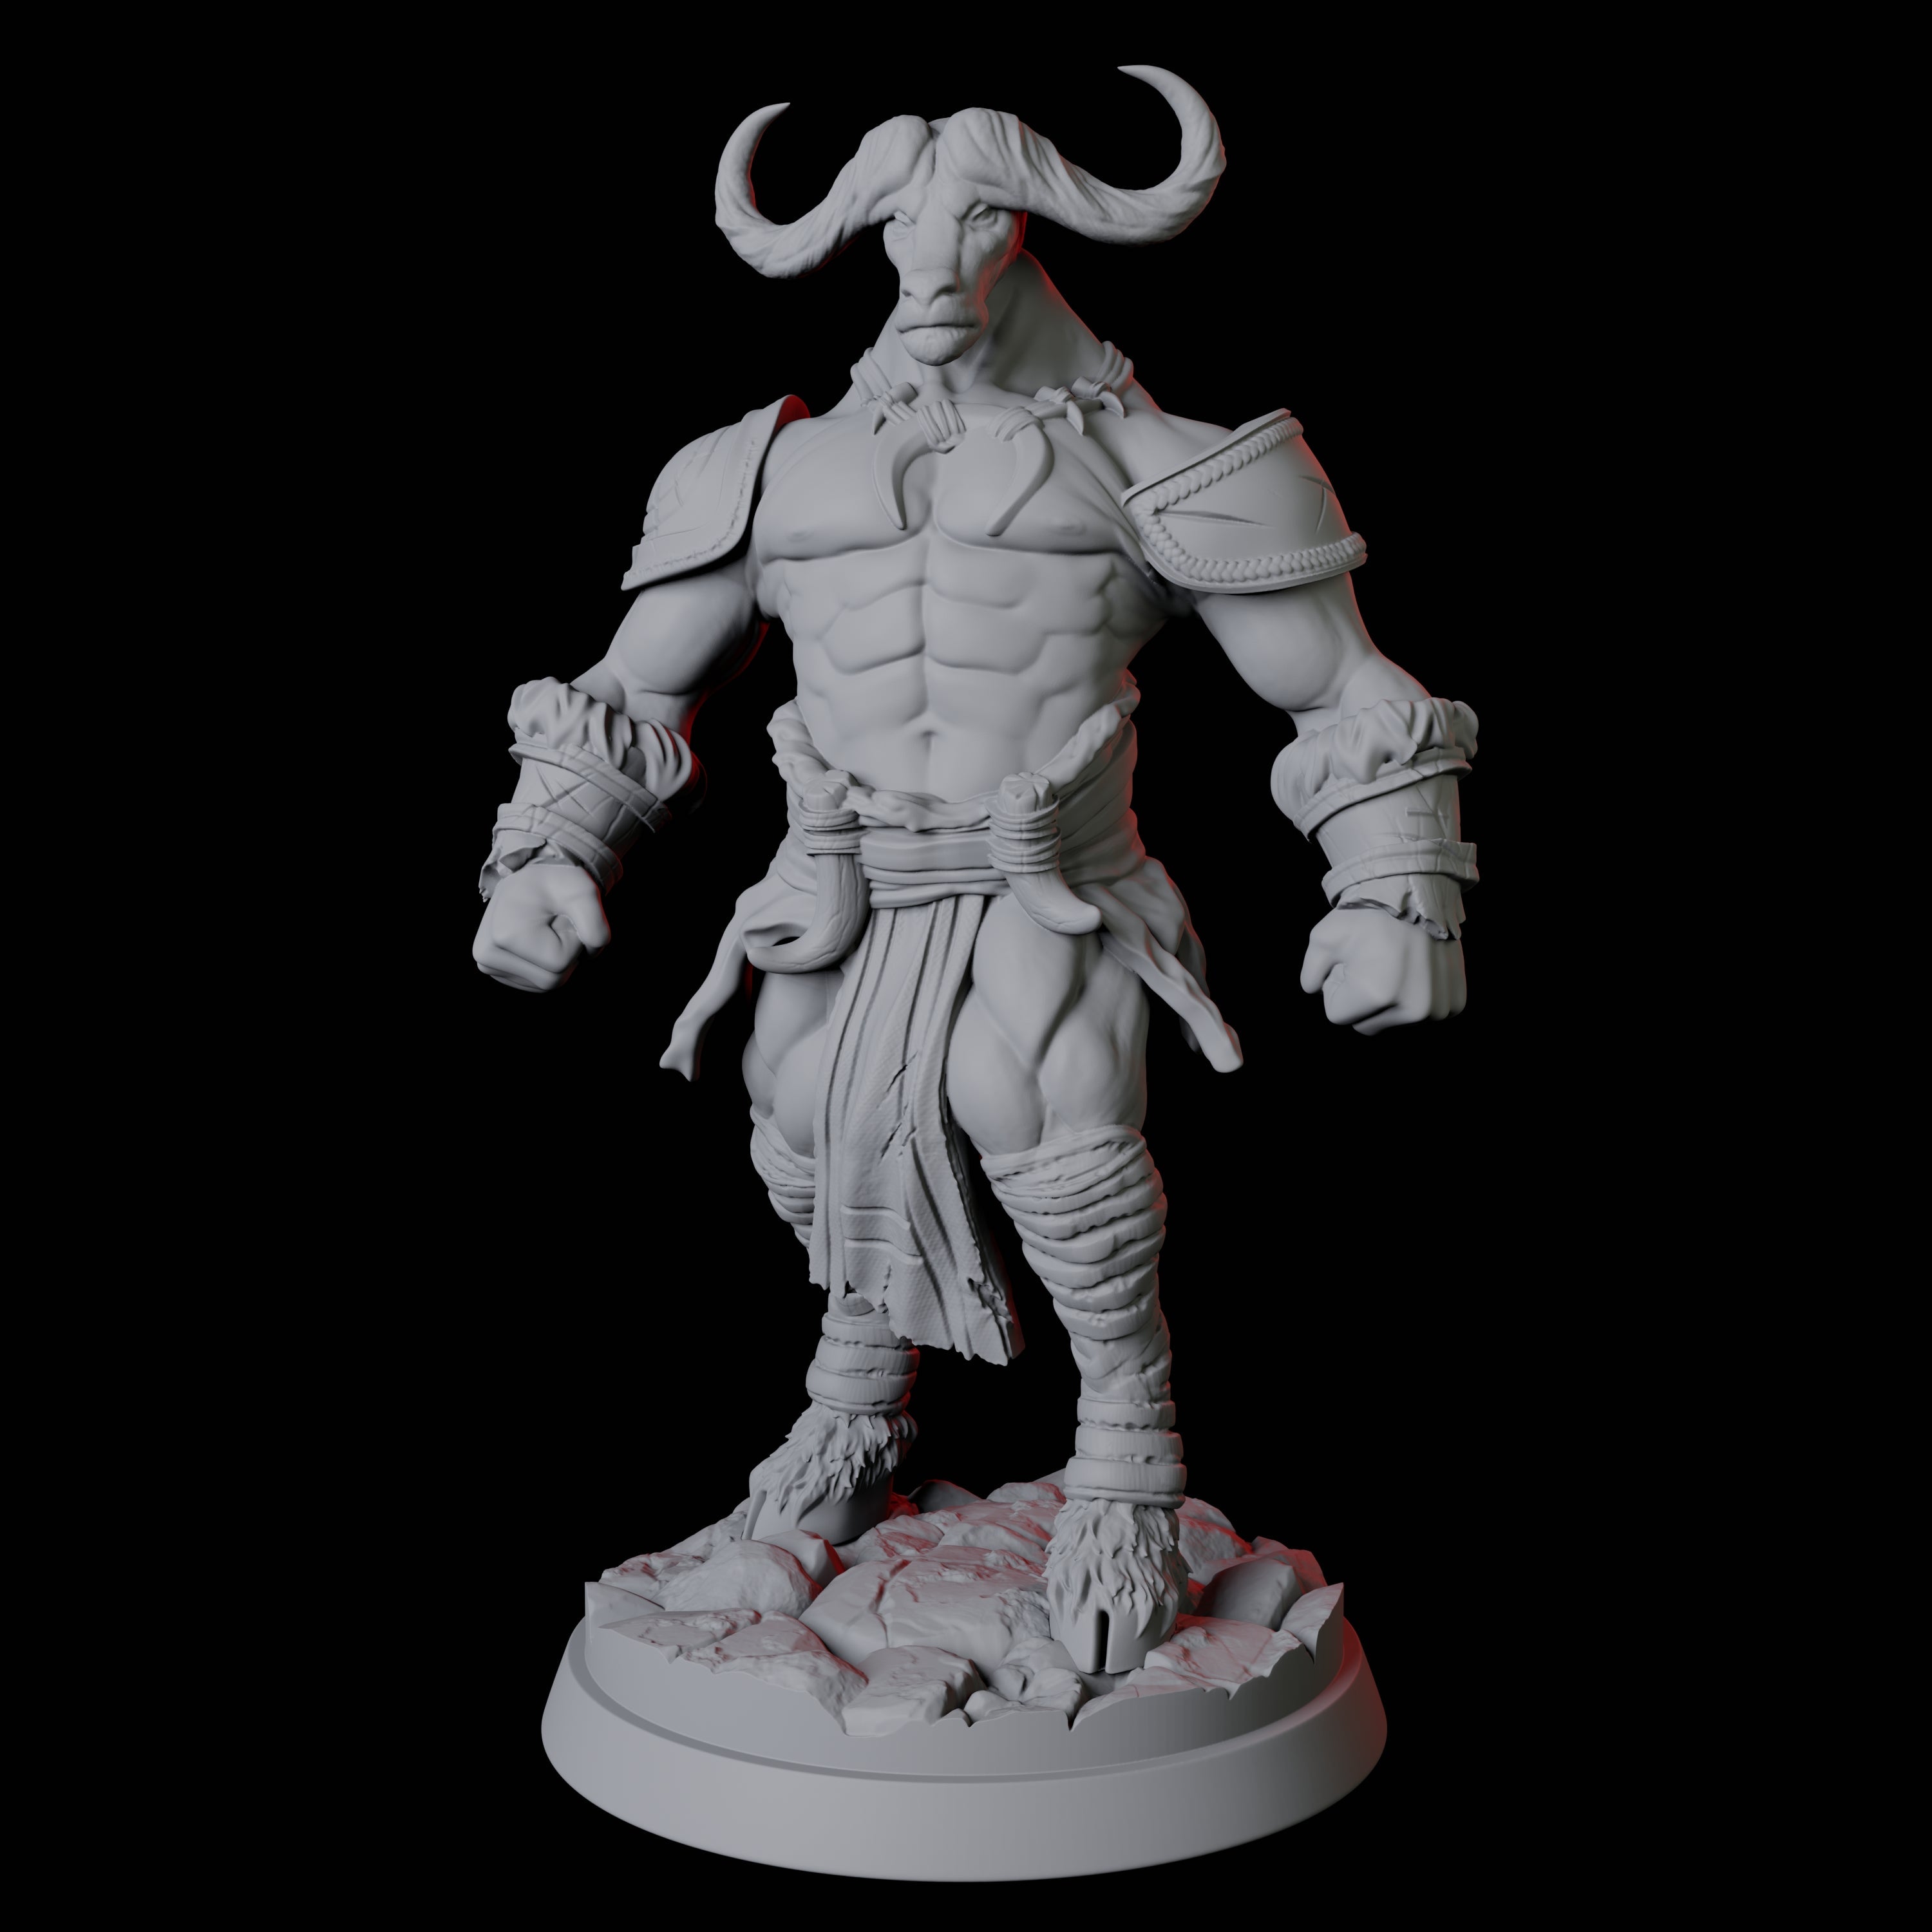 Gym Bro Yakfolk Miniature for Dungeons and Dragons, Pathfinder or other TTRPGs